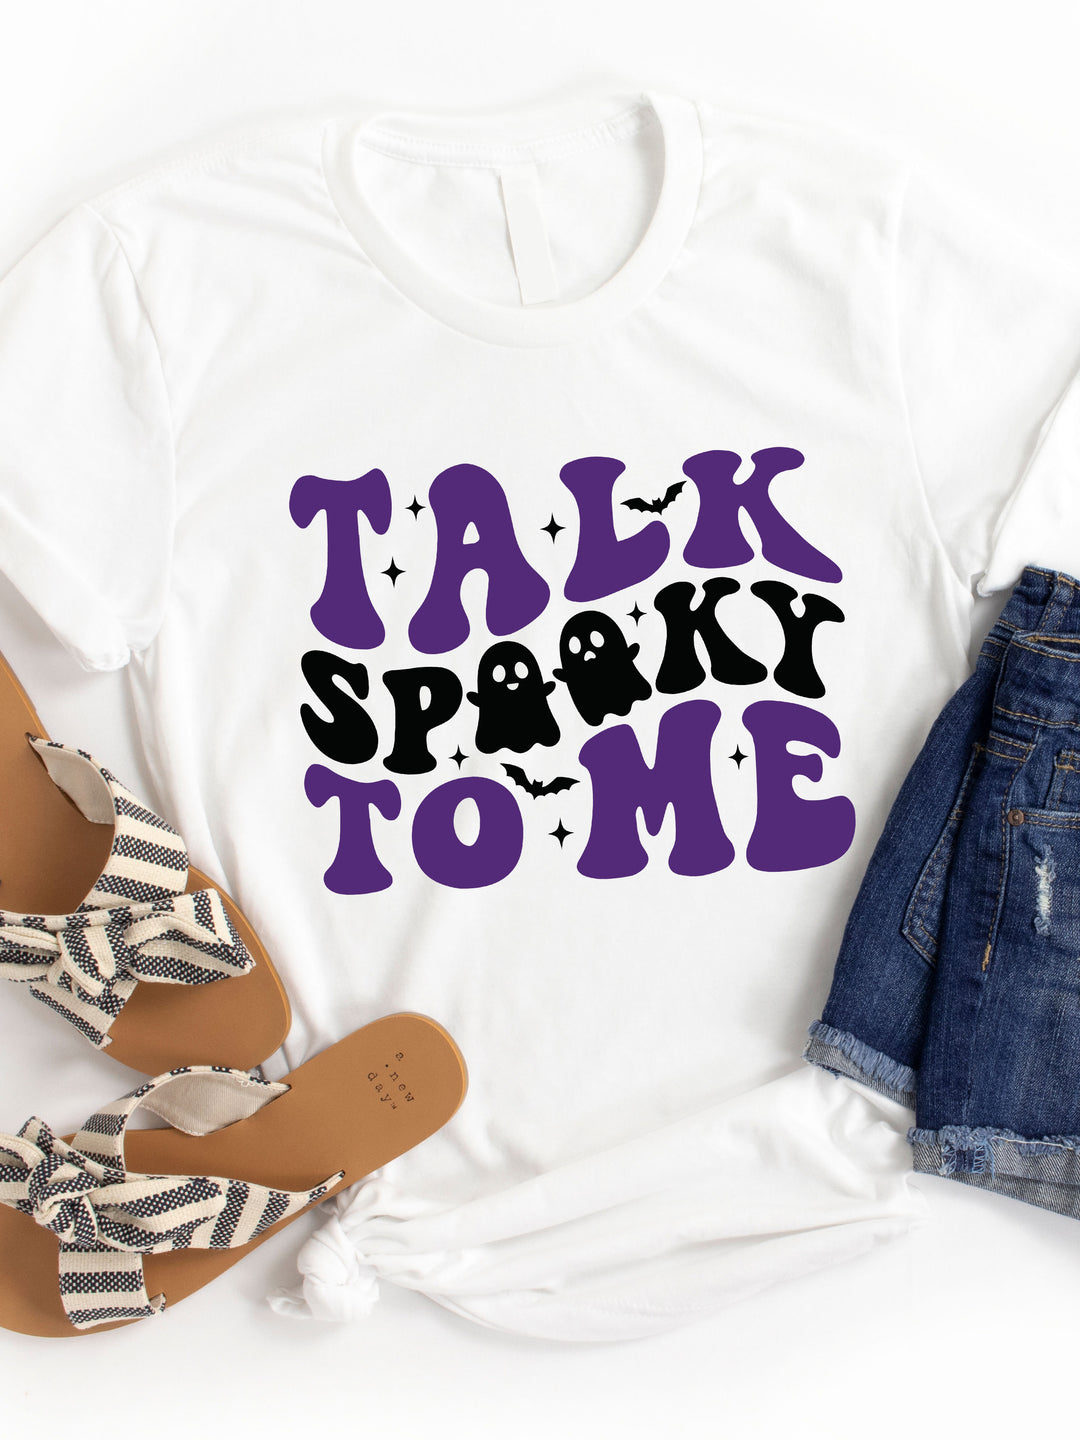 Talk Spooky to Me Graphic Tee